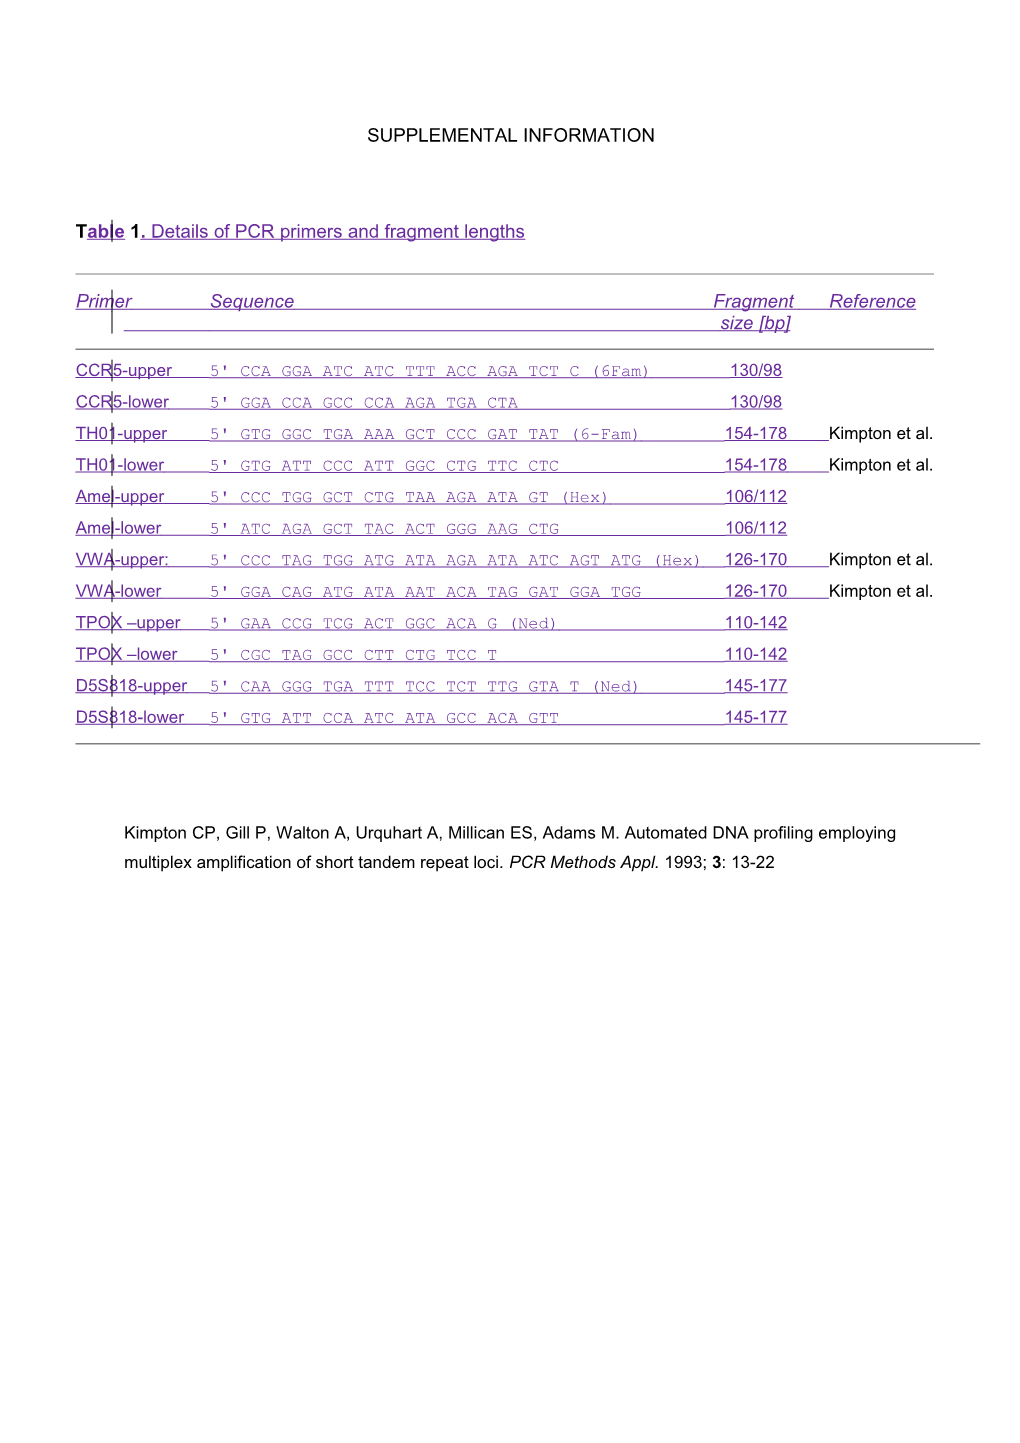 Table 1. Details of PCR Primers and Fragment Lengths